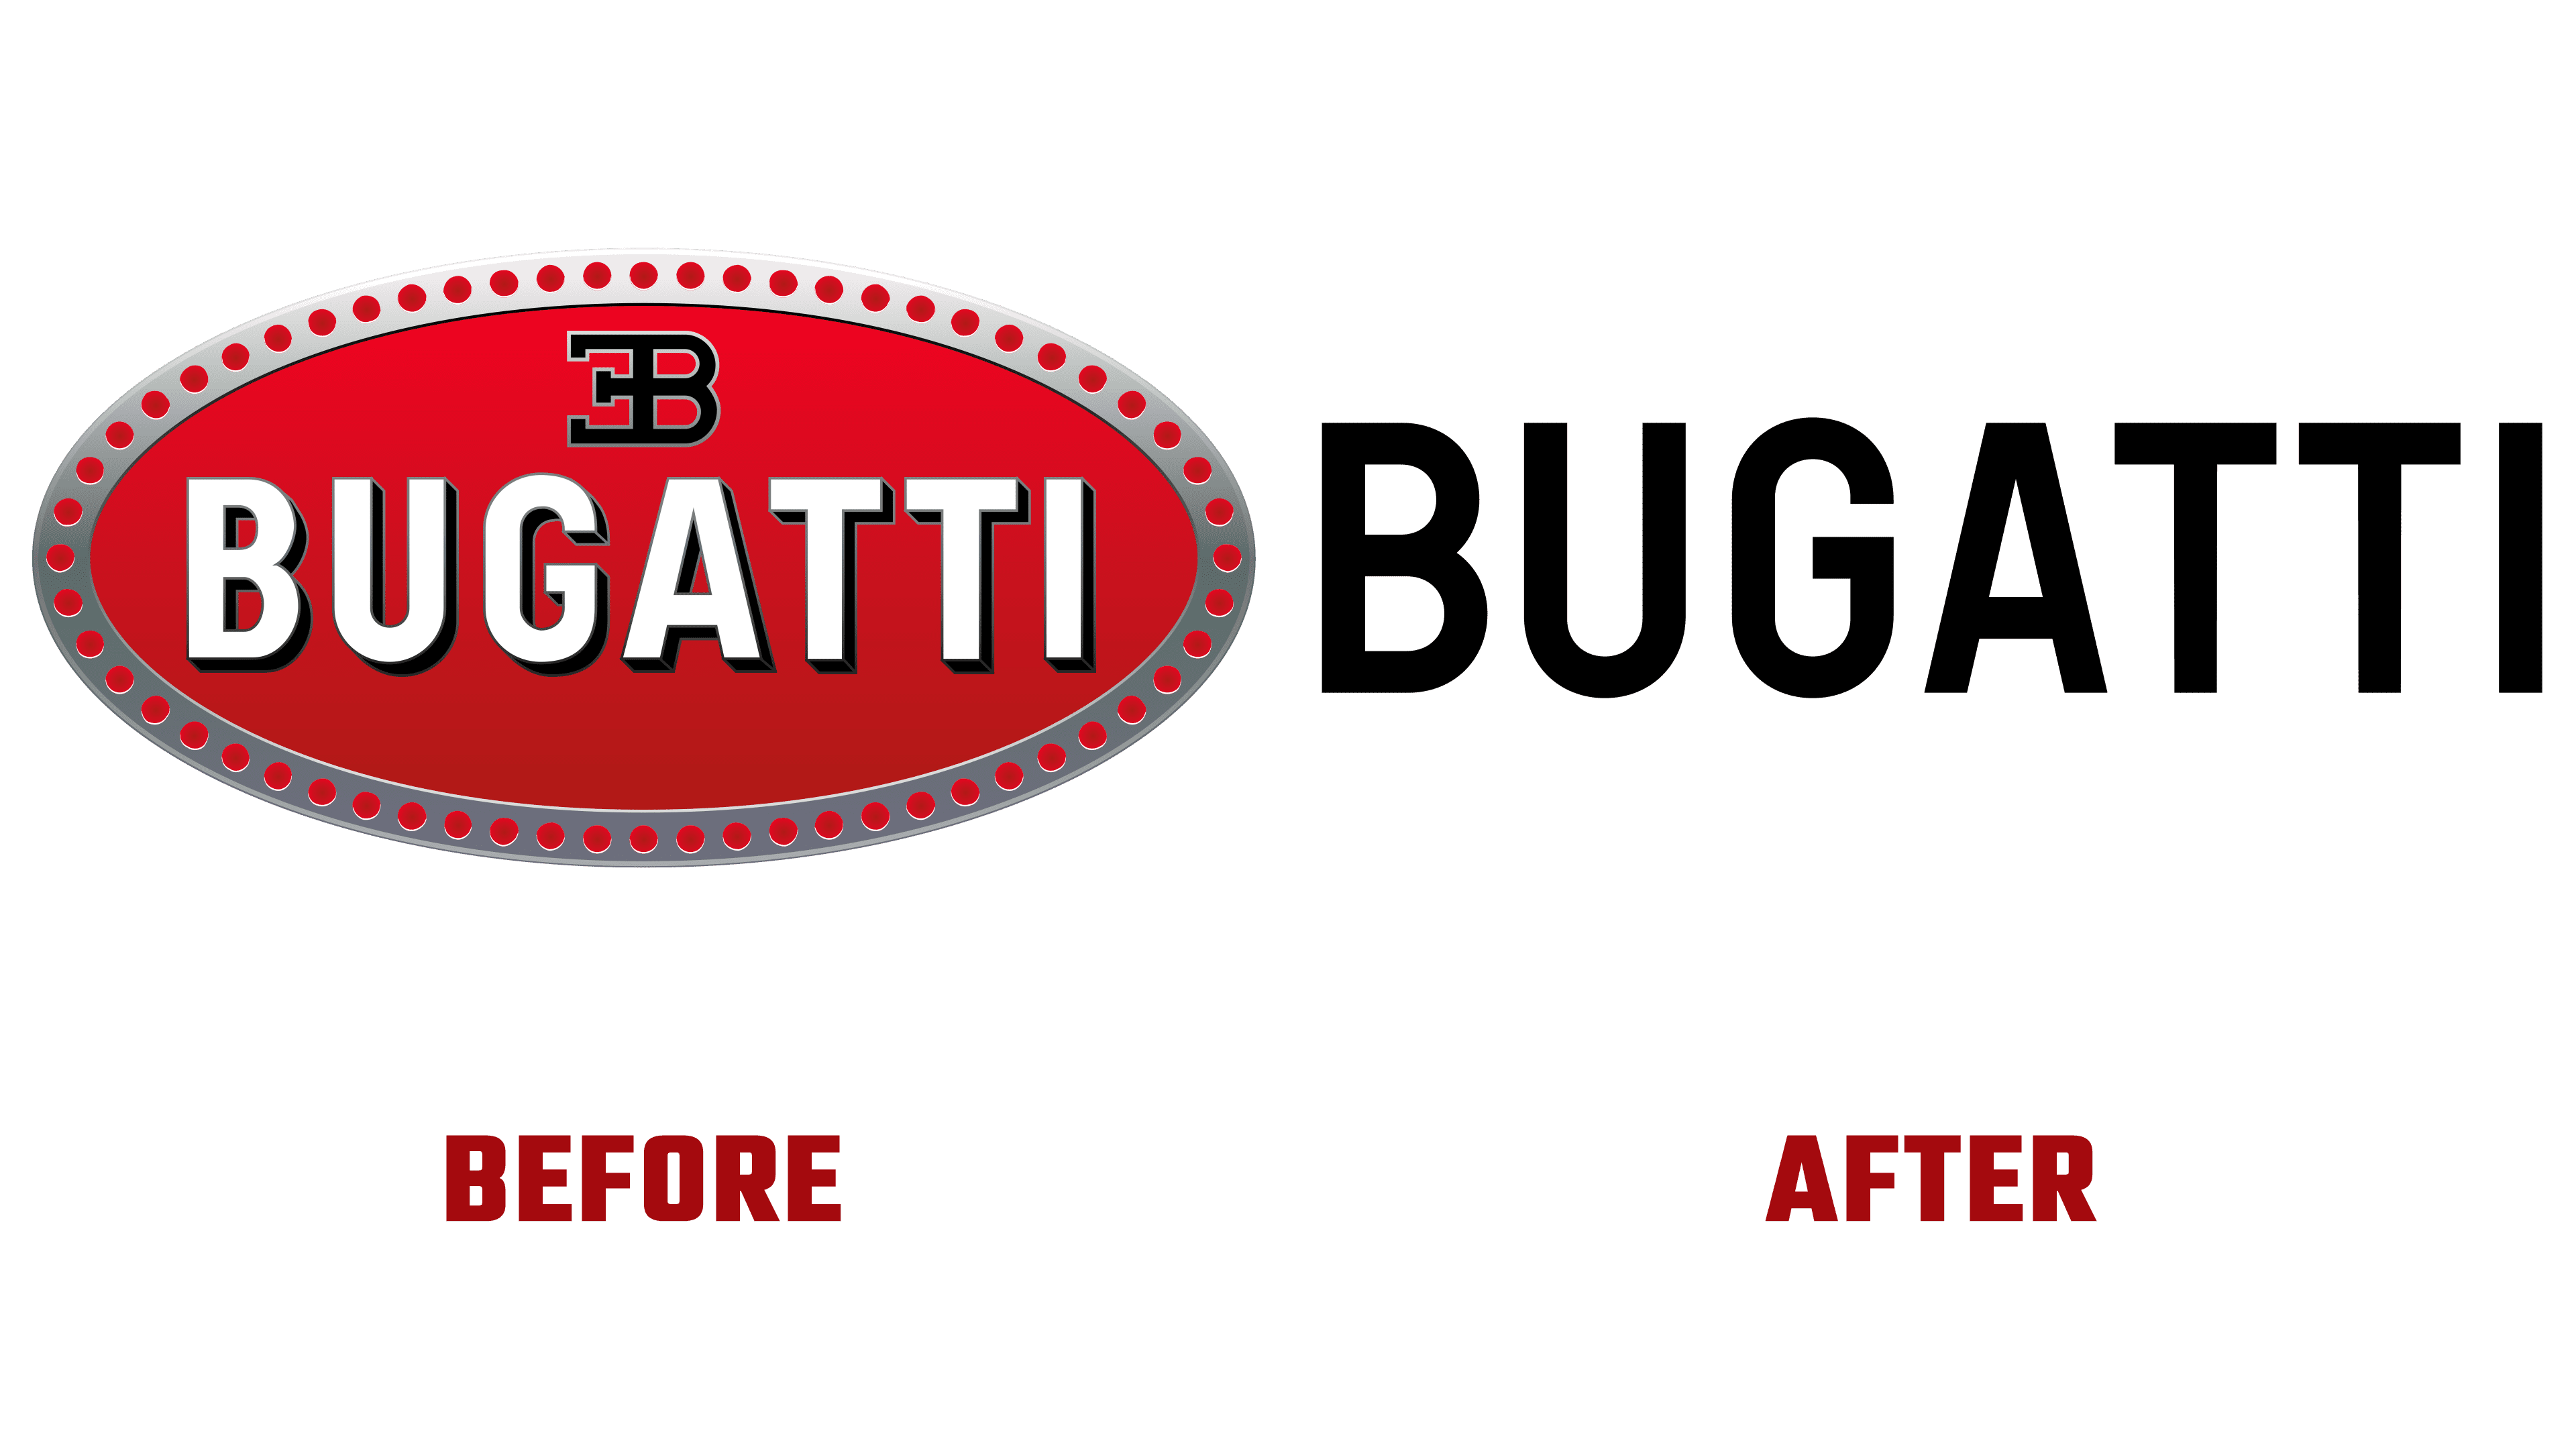 New identity for an old classic: Bugatti logo moves to a luxury level